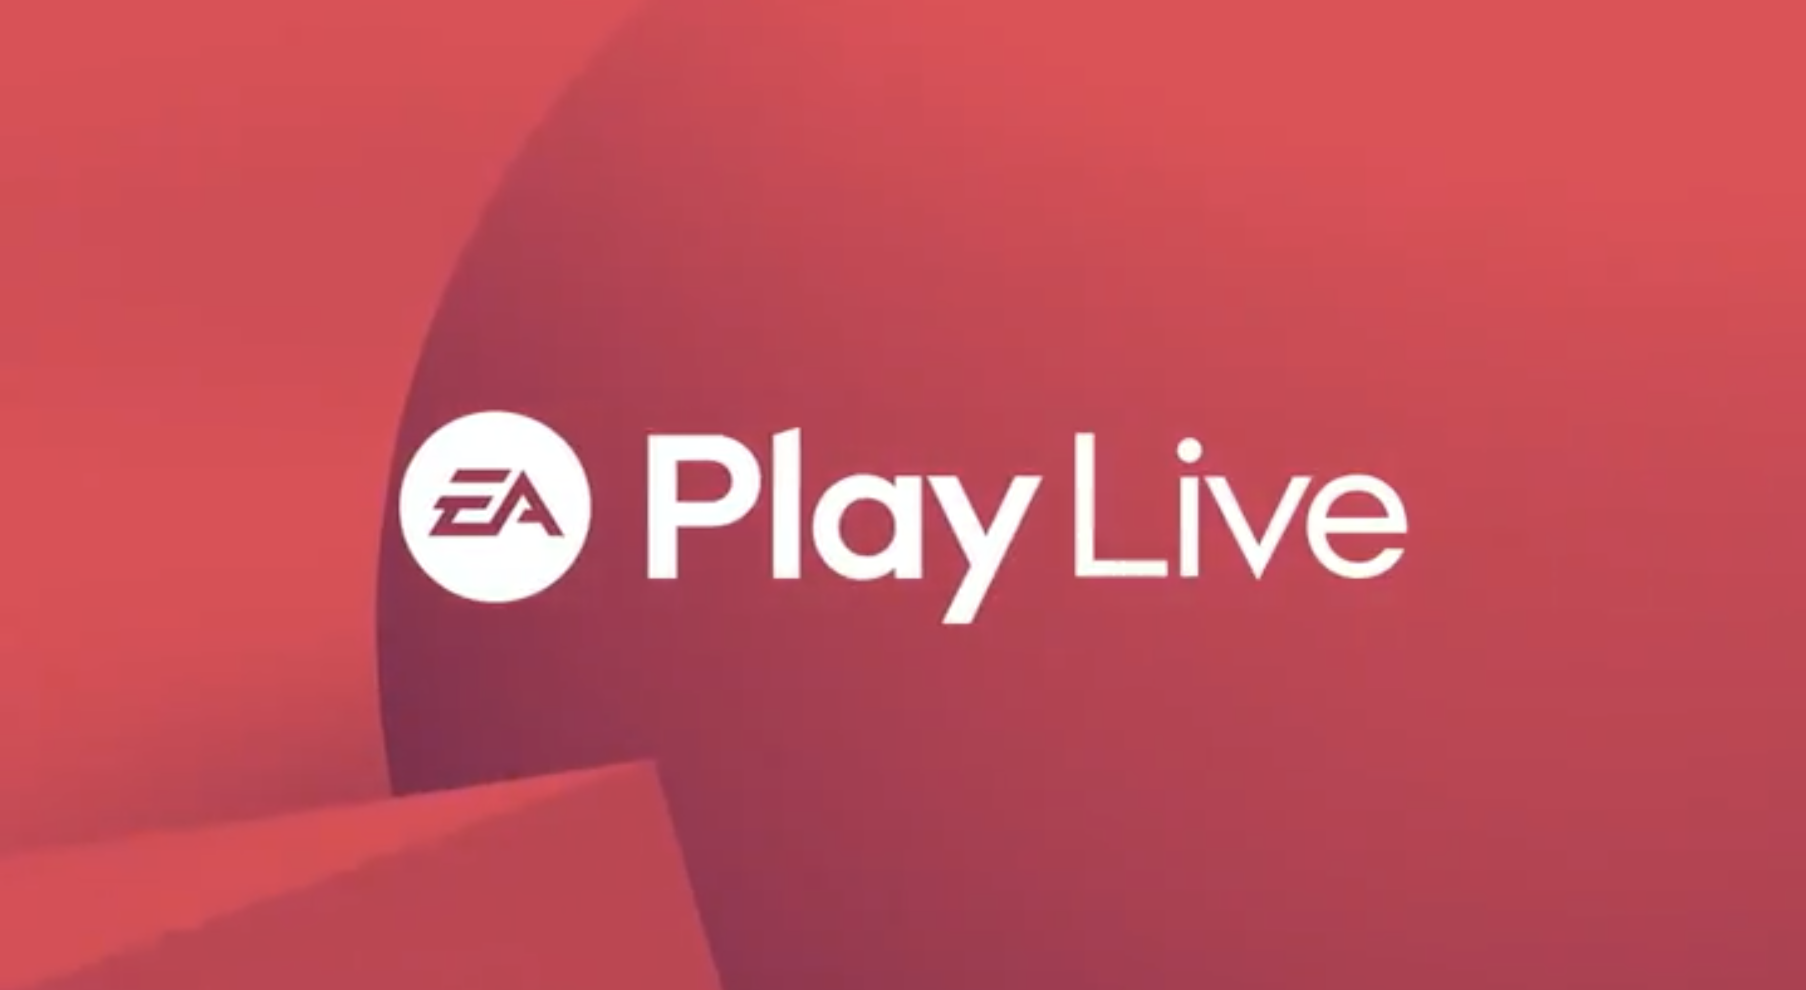 Watch Ea Play Live With Us Starting At 6 40pm Et Wilson S Media - roblox myths clinton roblox generator font